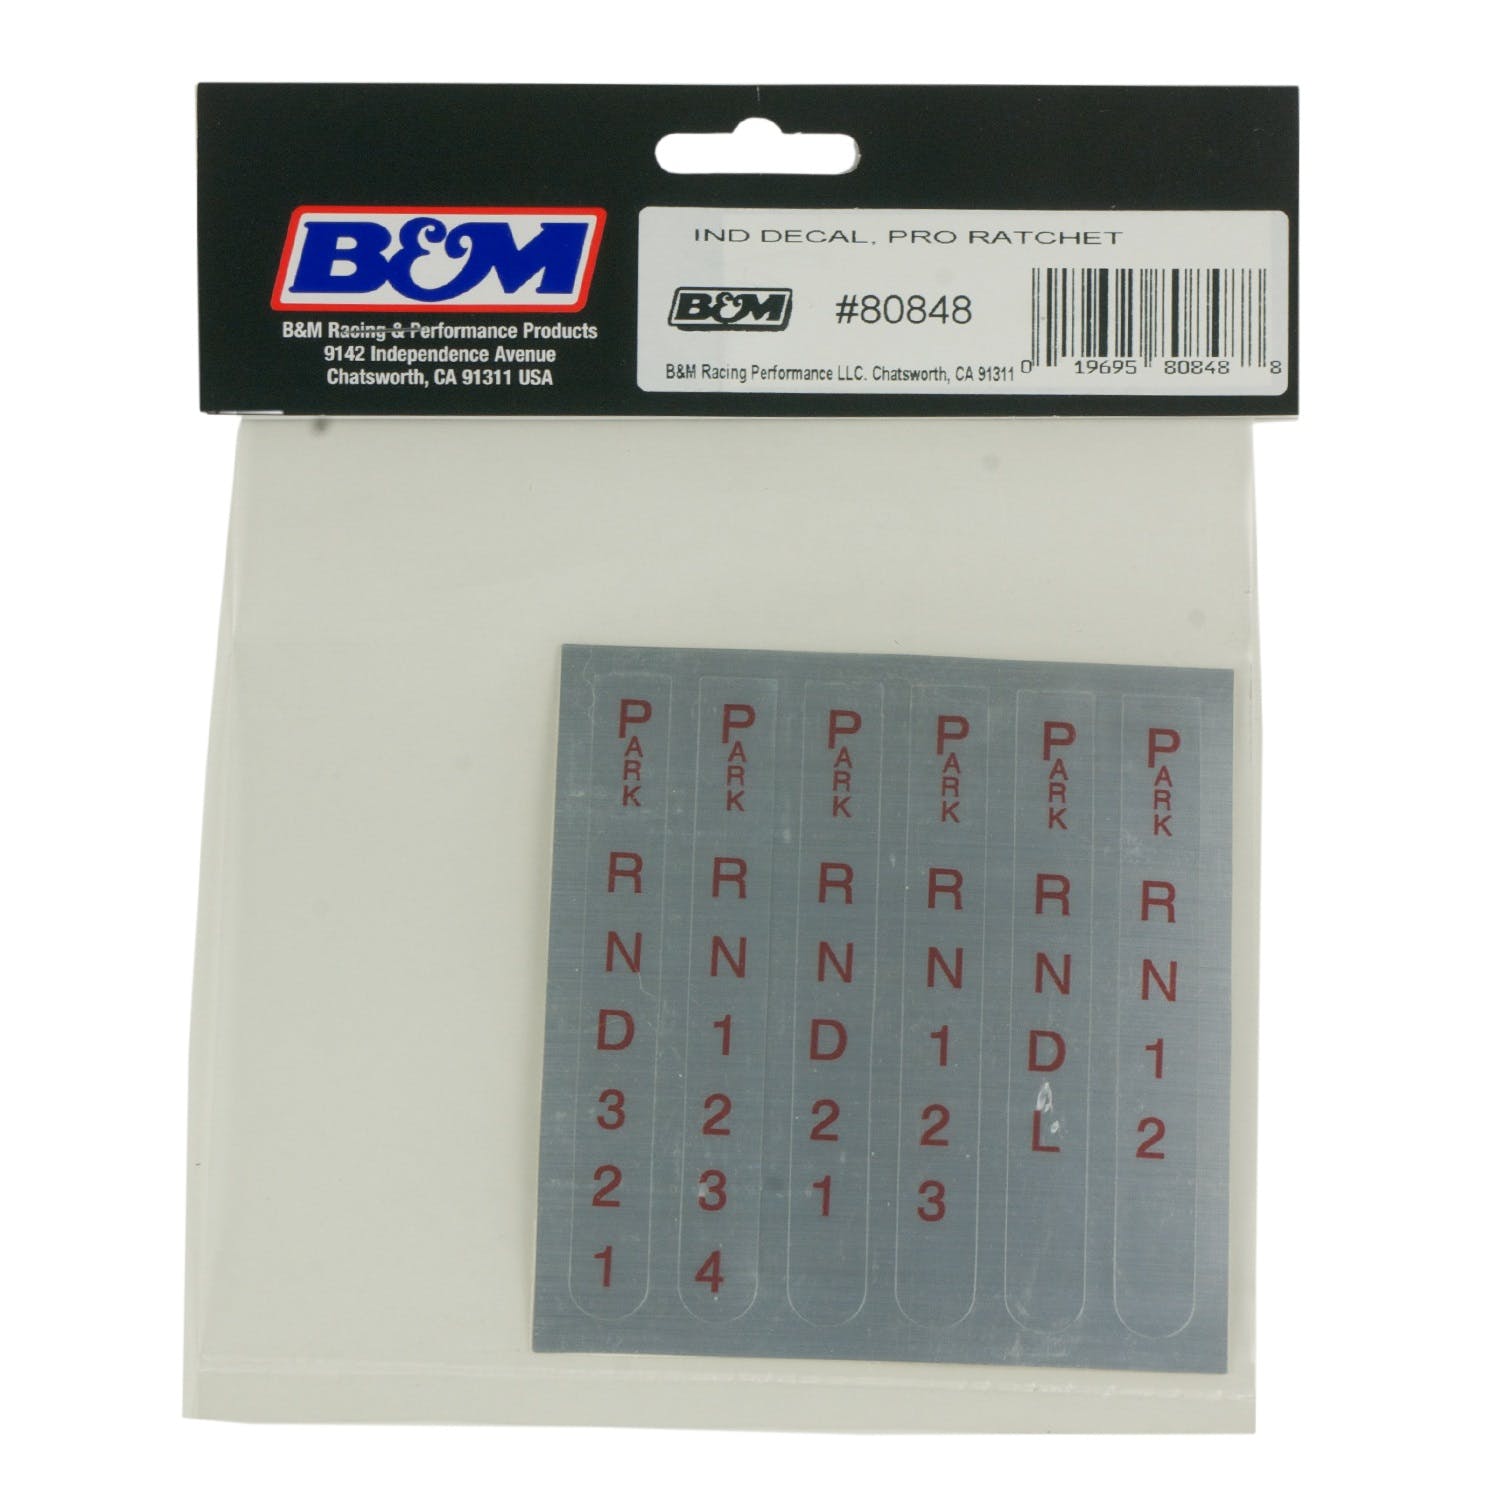 B&M 80848 IND DECAL, PRO RATCHT